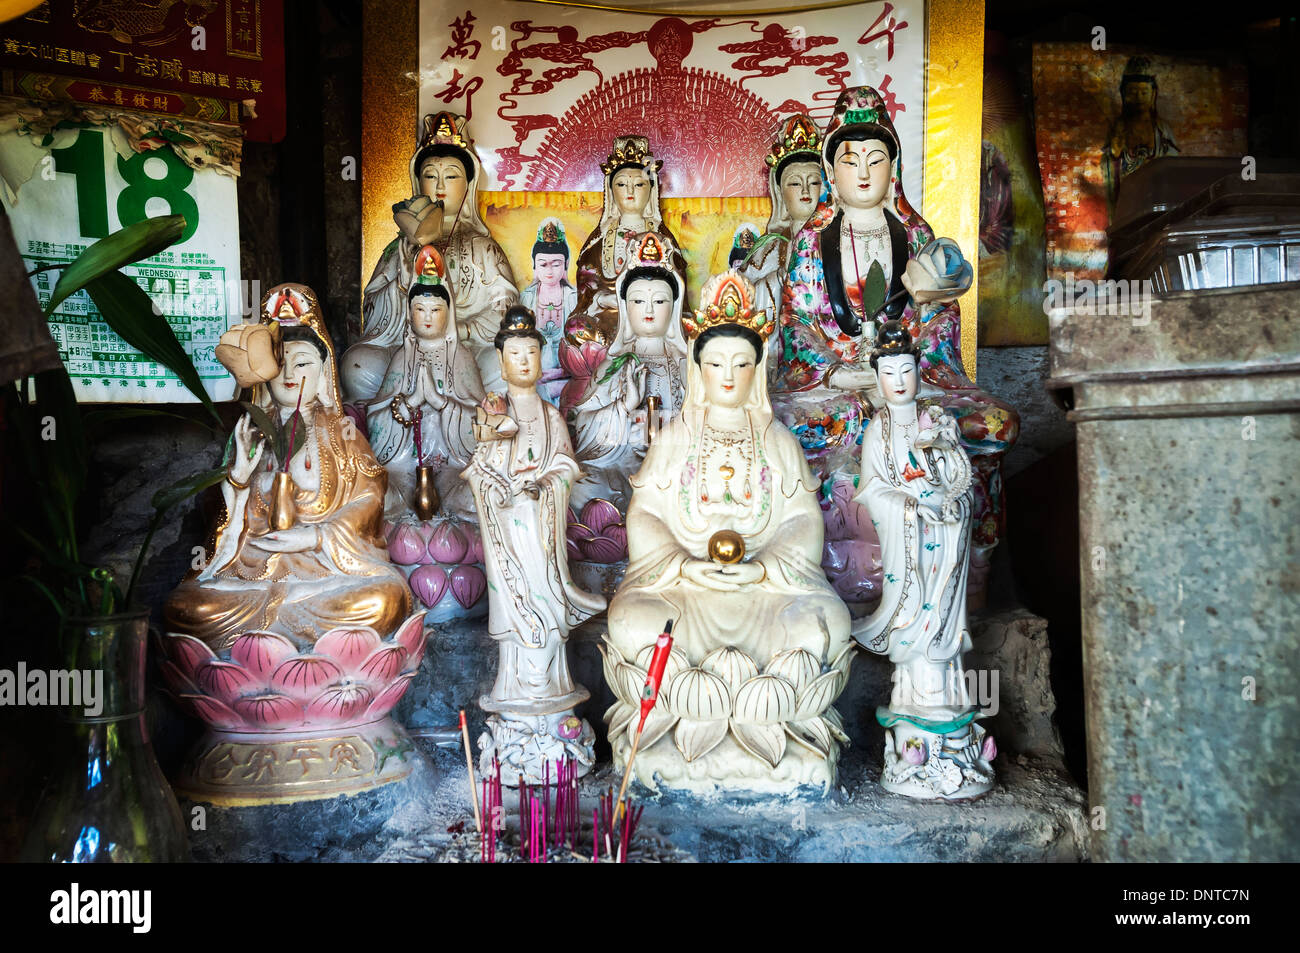 Statues of the Goddess of Mercy Guanyin in a makeshift shrine, Hong Kong Stock Photo